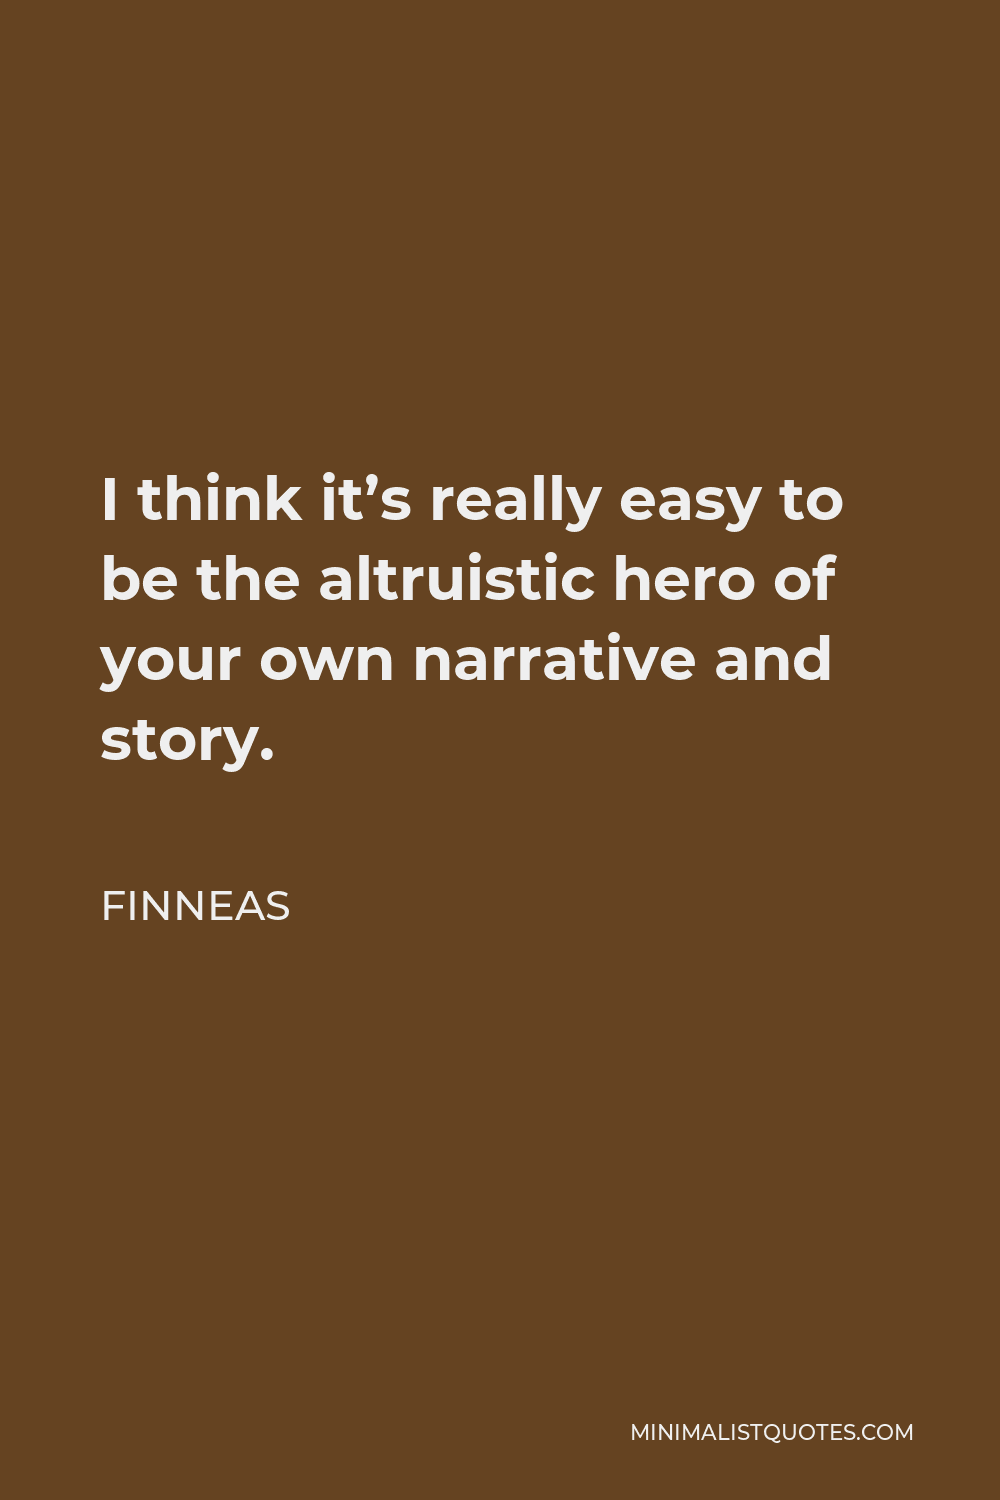 Finneas Quote - I think it’s really easy to be the altruistic hero of your own narrative and story.